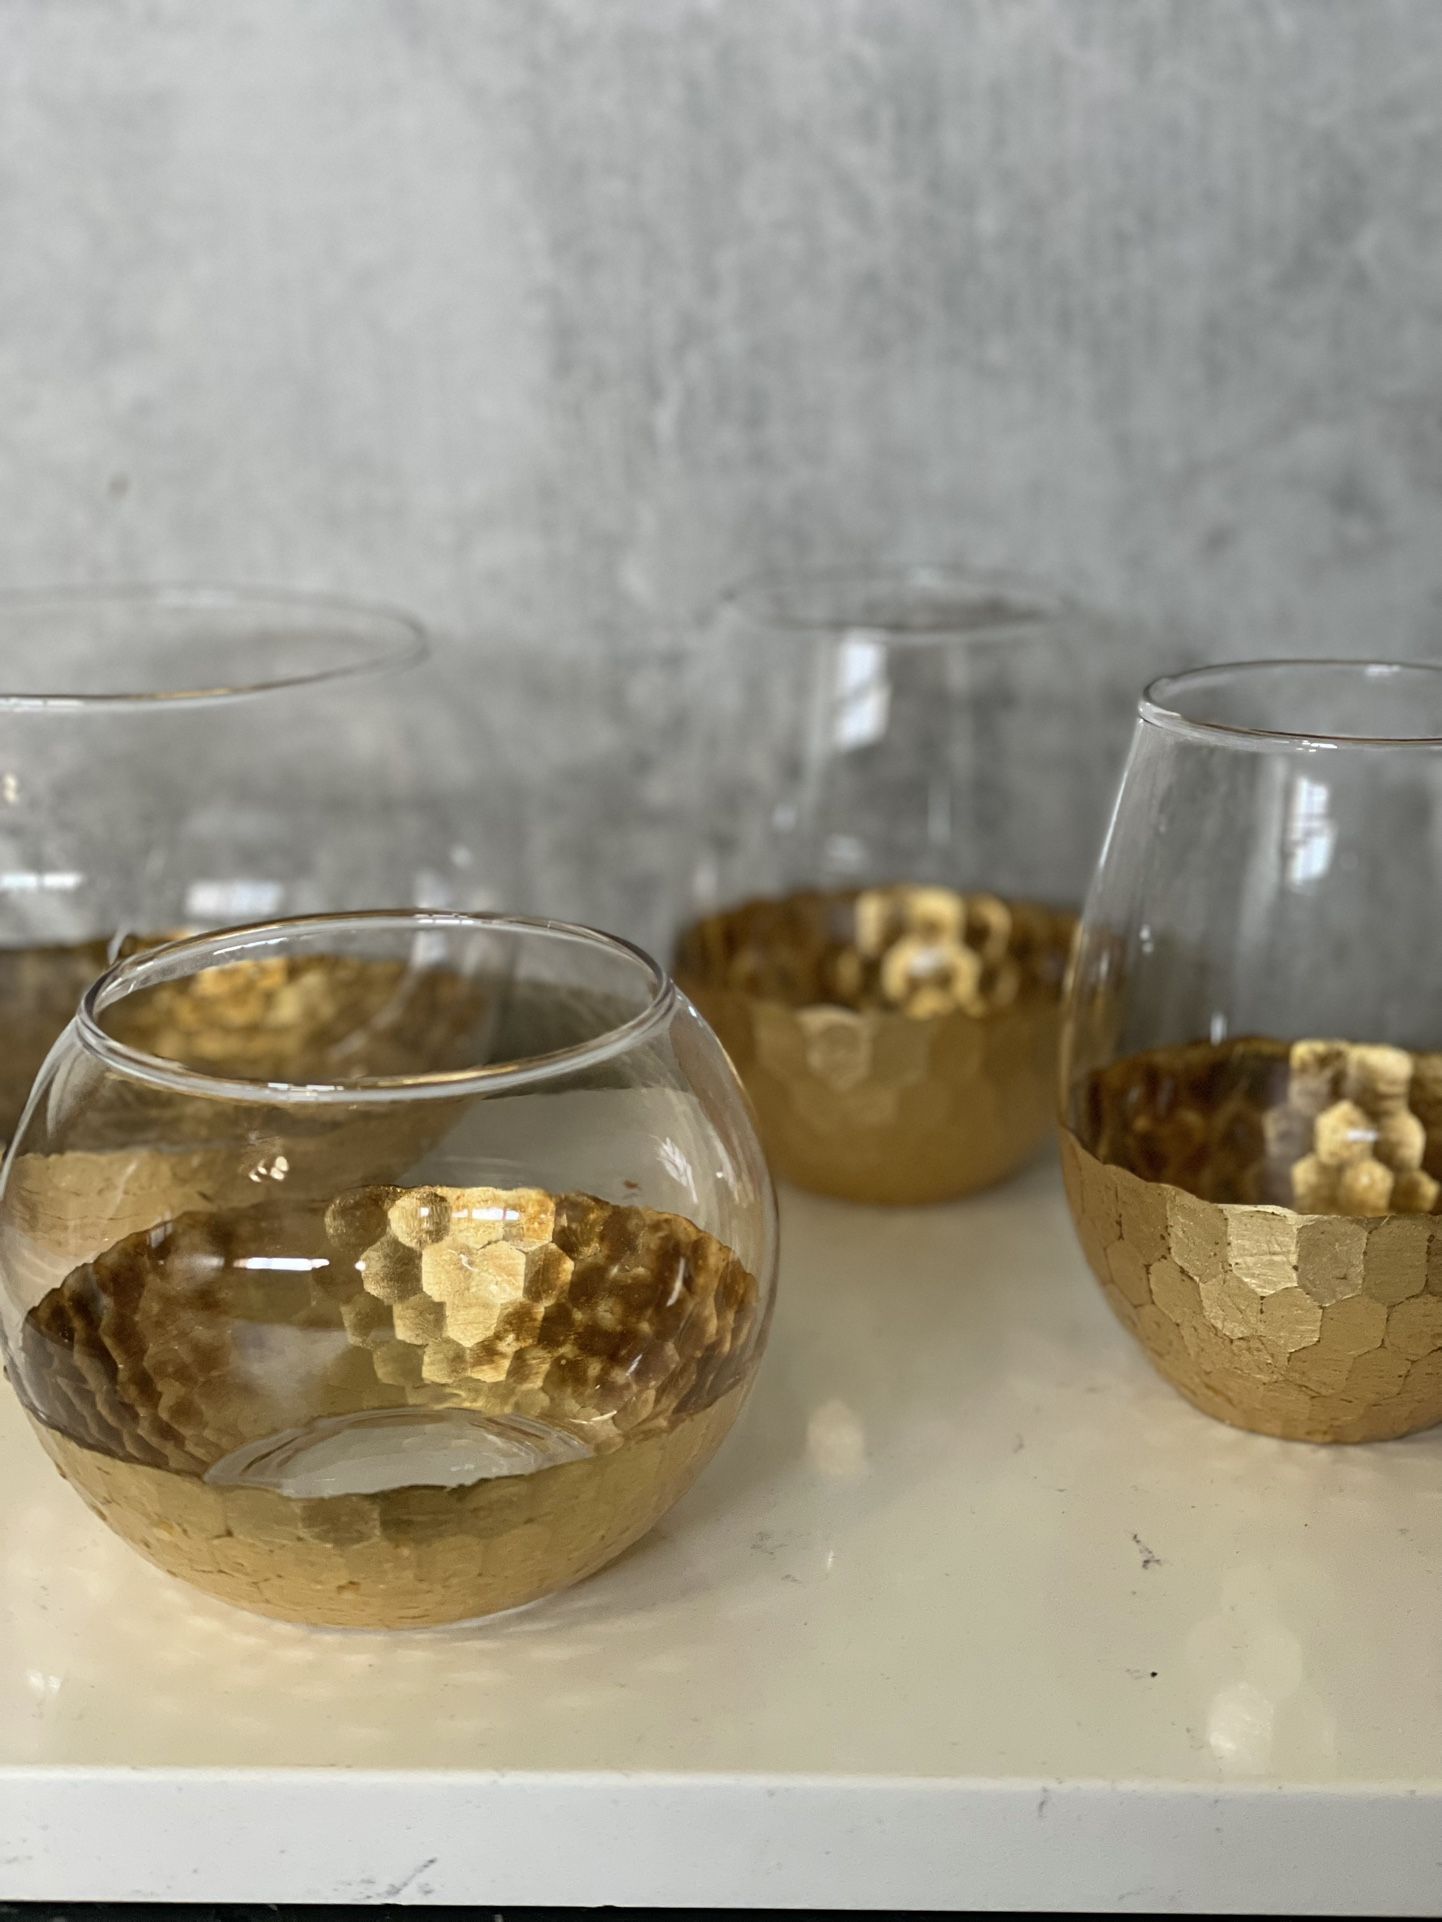 Decorative Bowls And Glasses